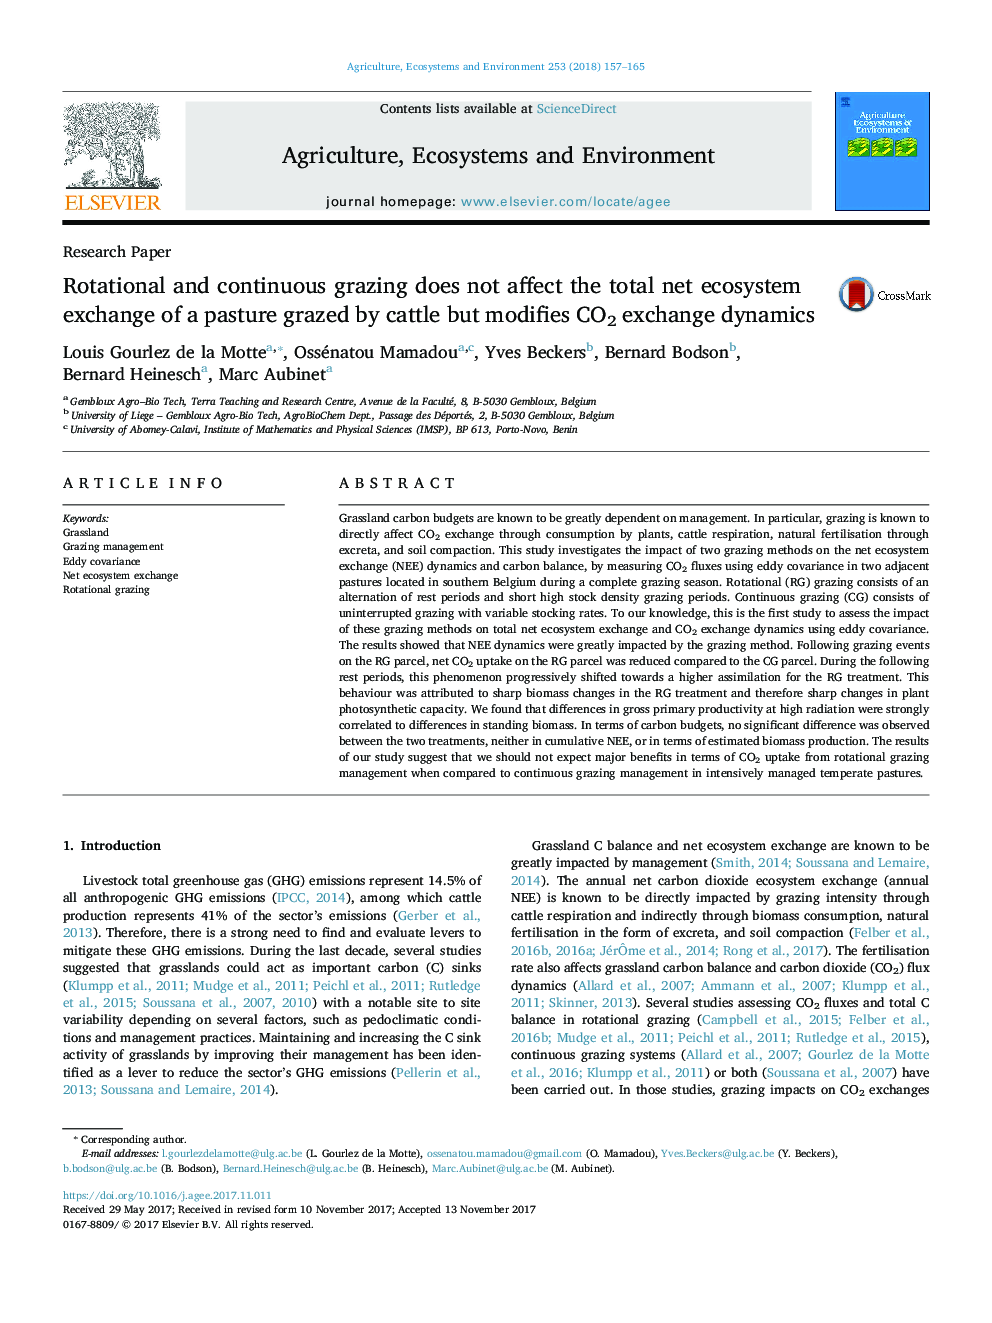 Rotational and continuous grazing does not affect the total net ecosystem exchange of a pasture grazed by cattle but modifies CO2 exchange dynamics